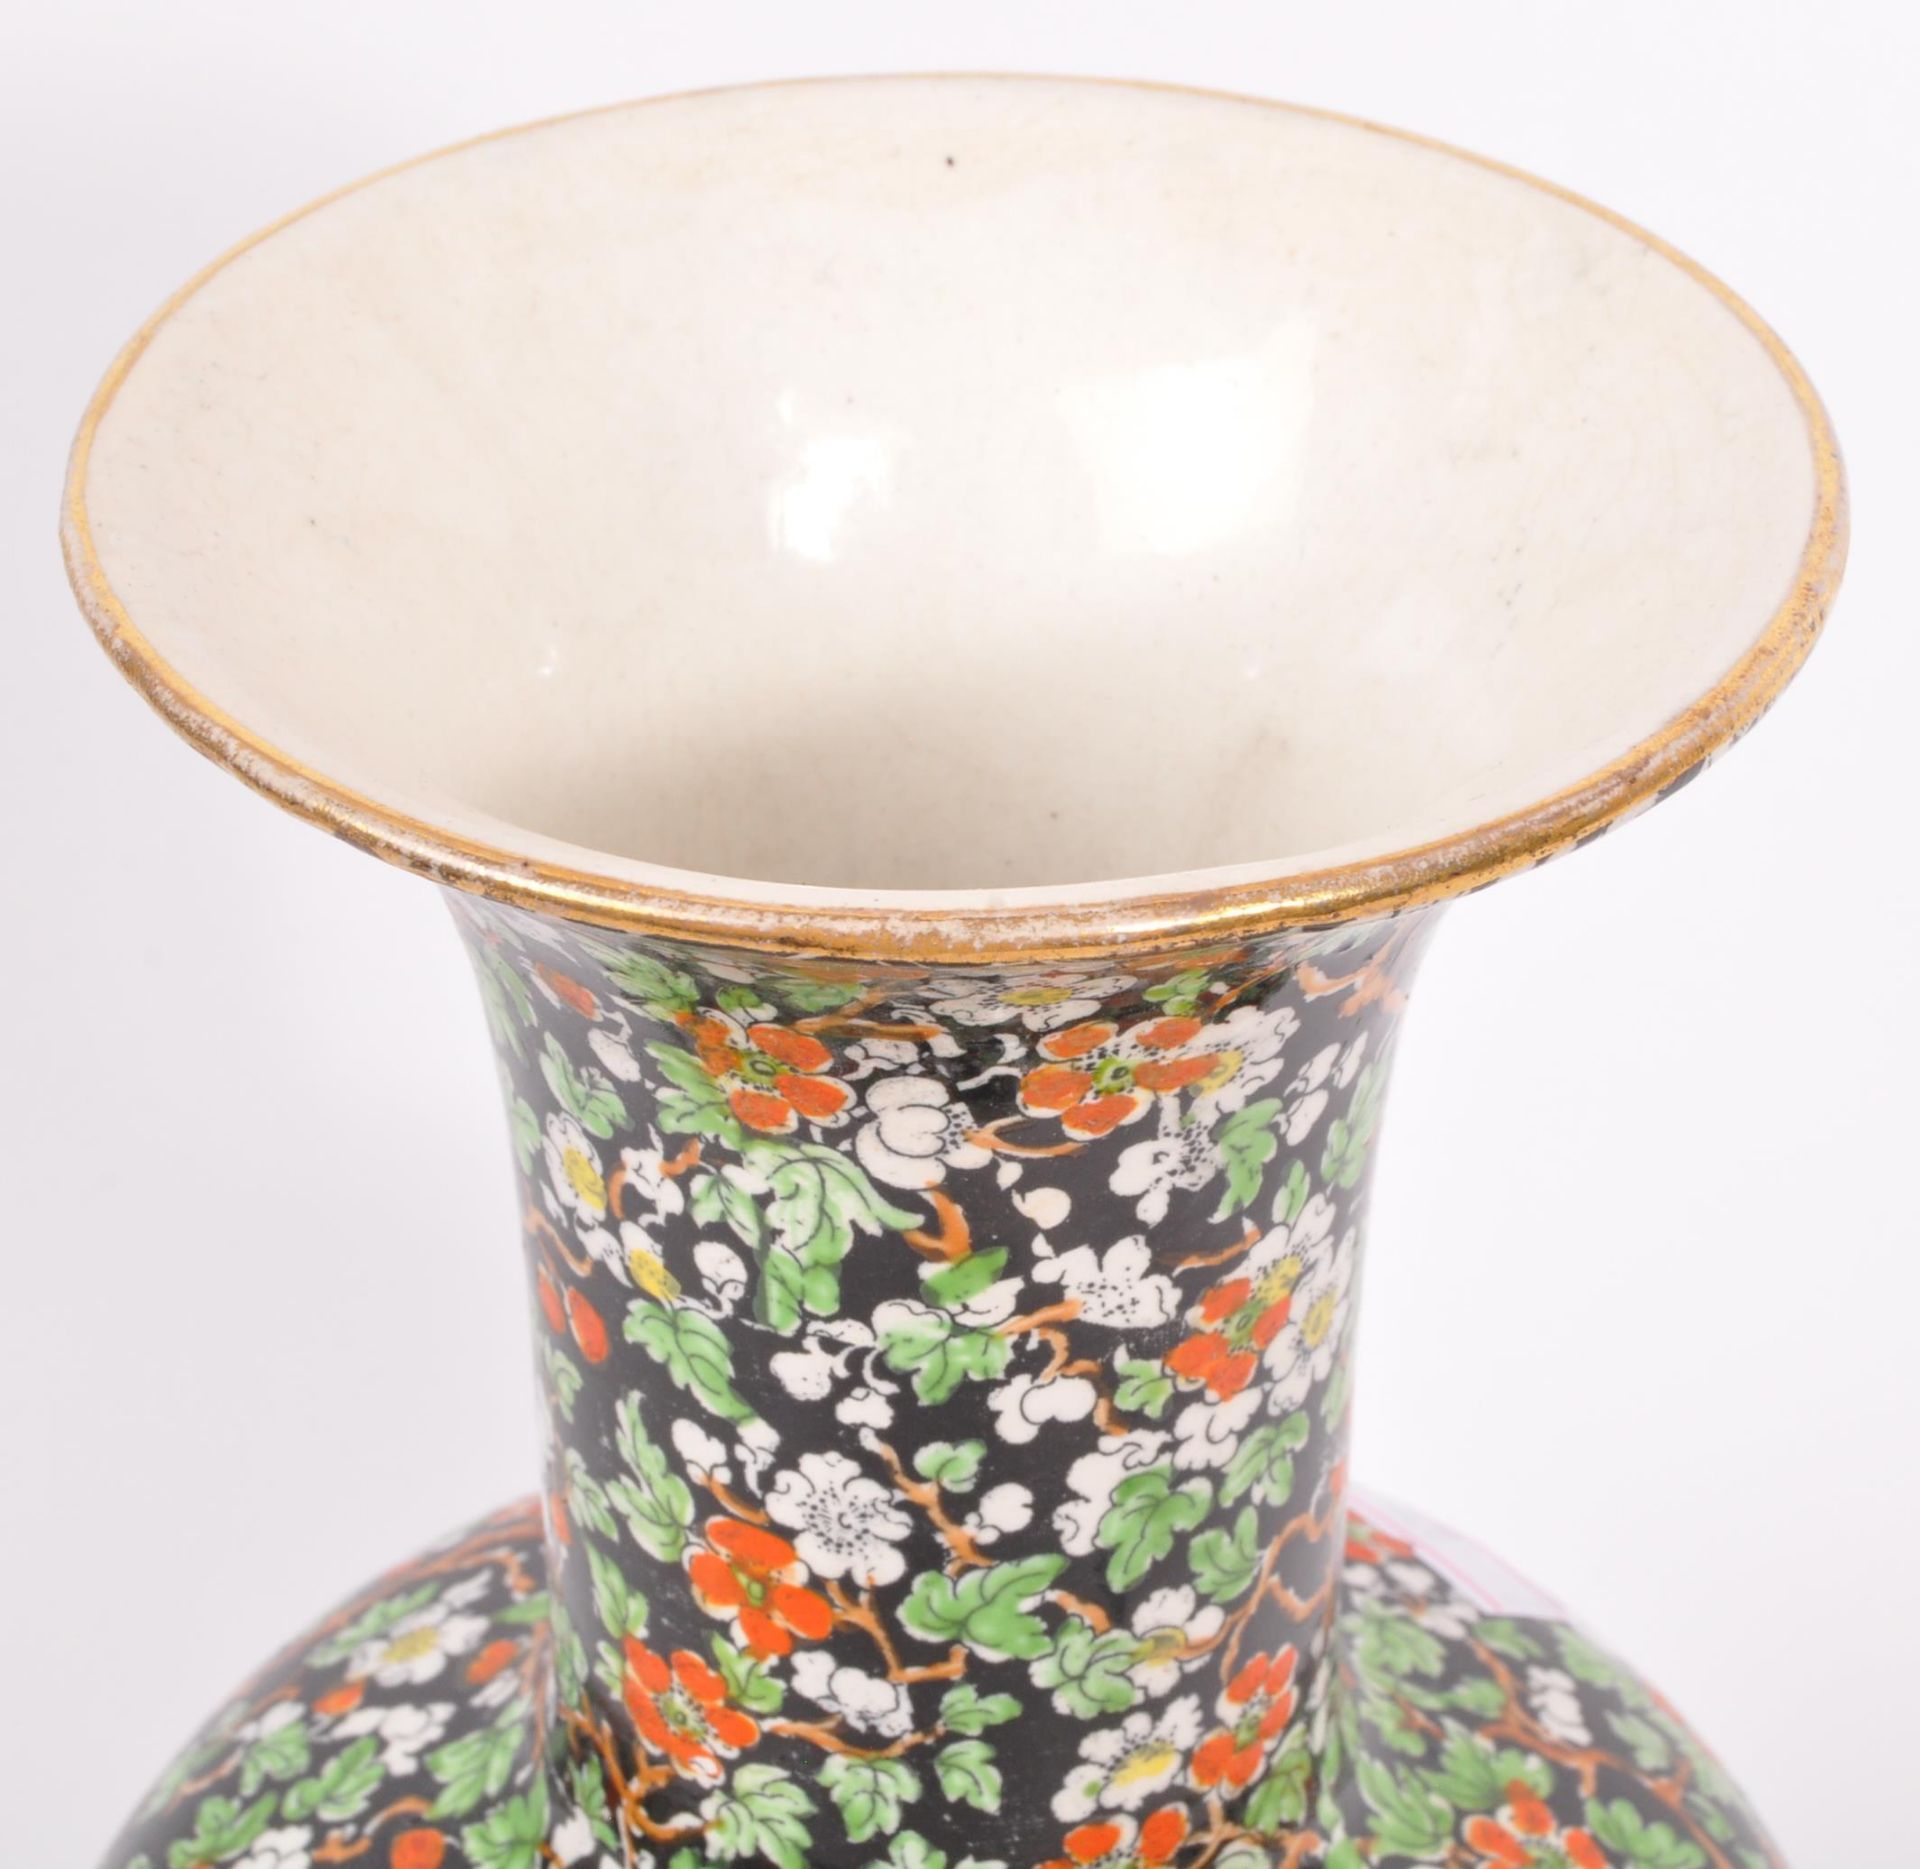 EARLY 19TH CENTURY CHINESE STYLE BALUSTER VASE BY MAYFIELD - Image 2 of 5